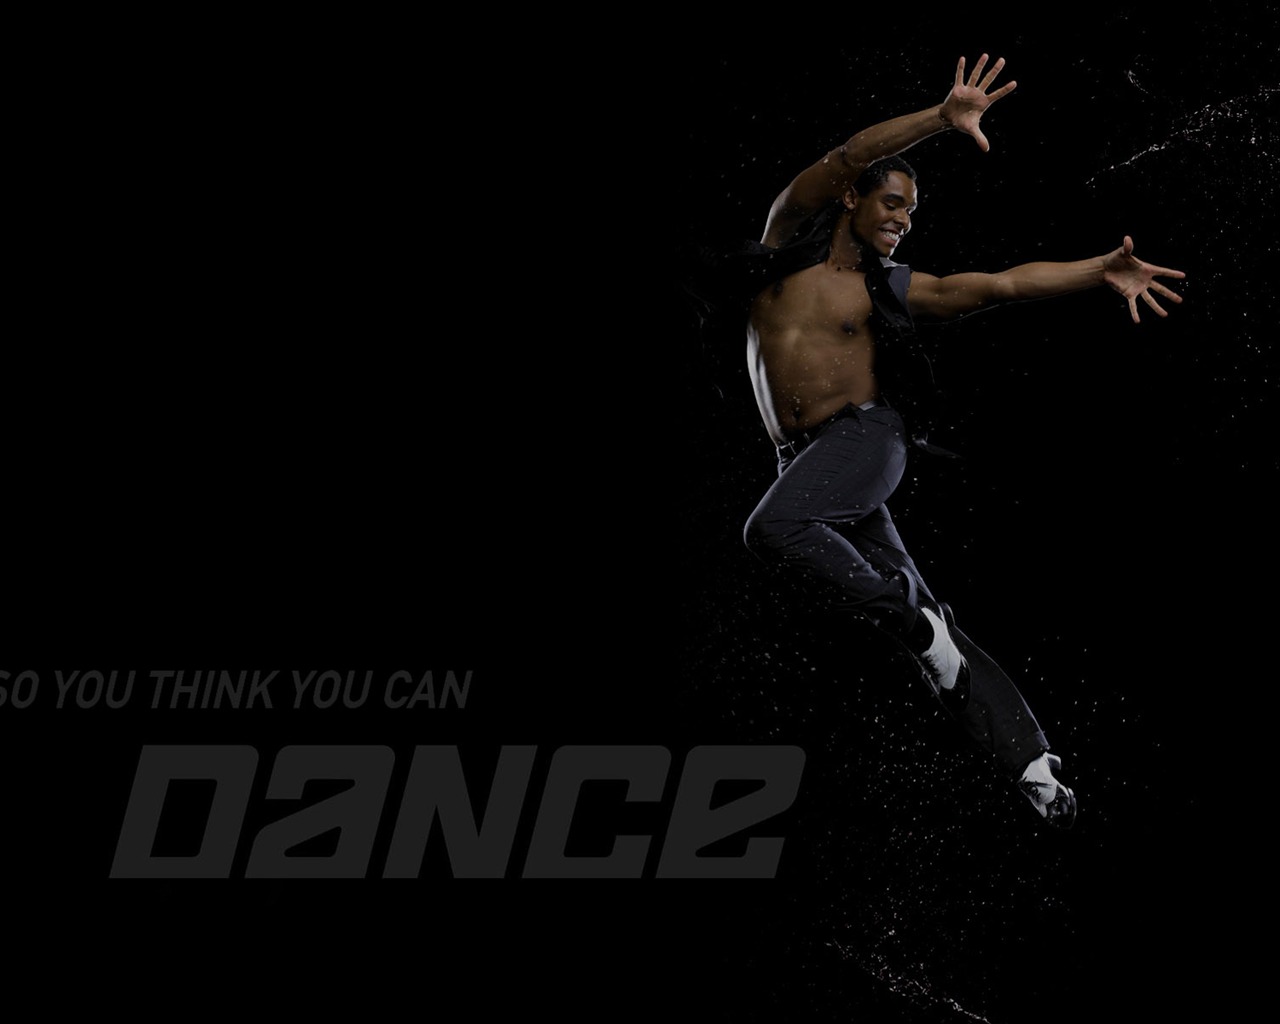 So You Think You Can Dance 舞林爭霸壁紙(二) #20 - 1280x1024